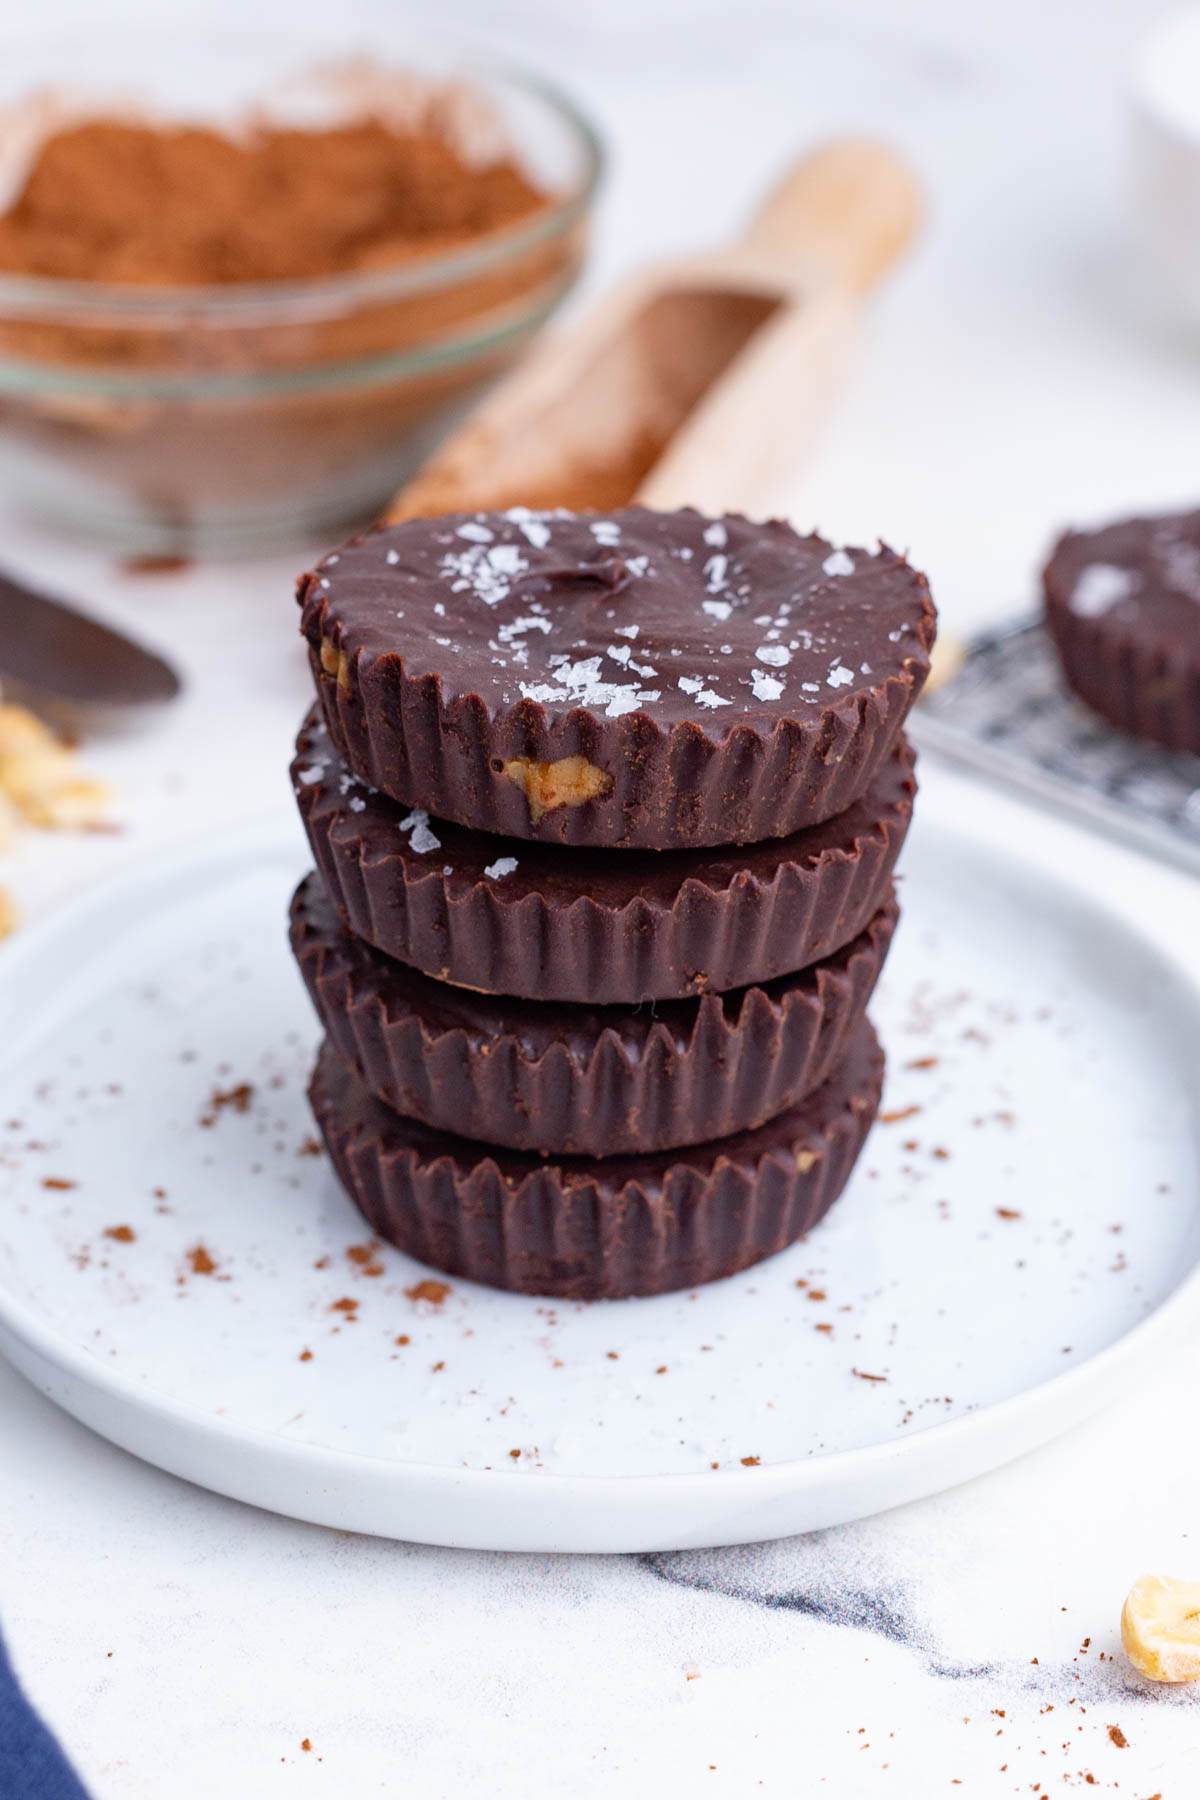 Chocolate peanut butter cups are topped with course salt.